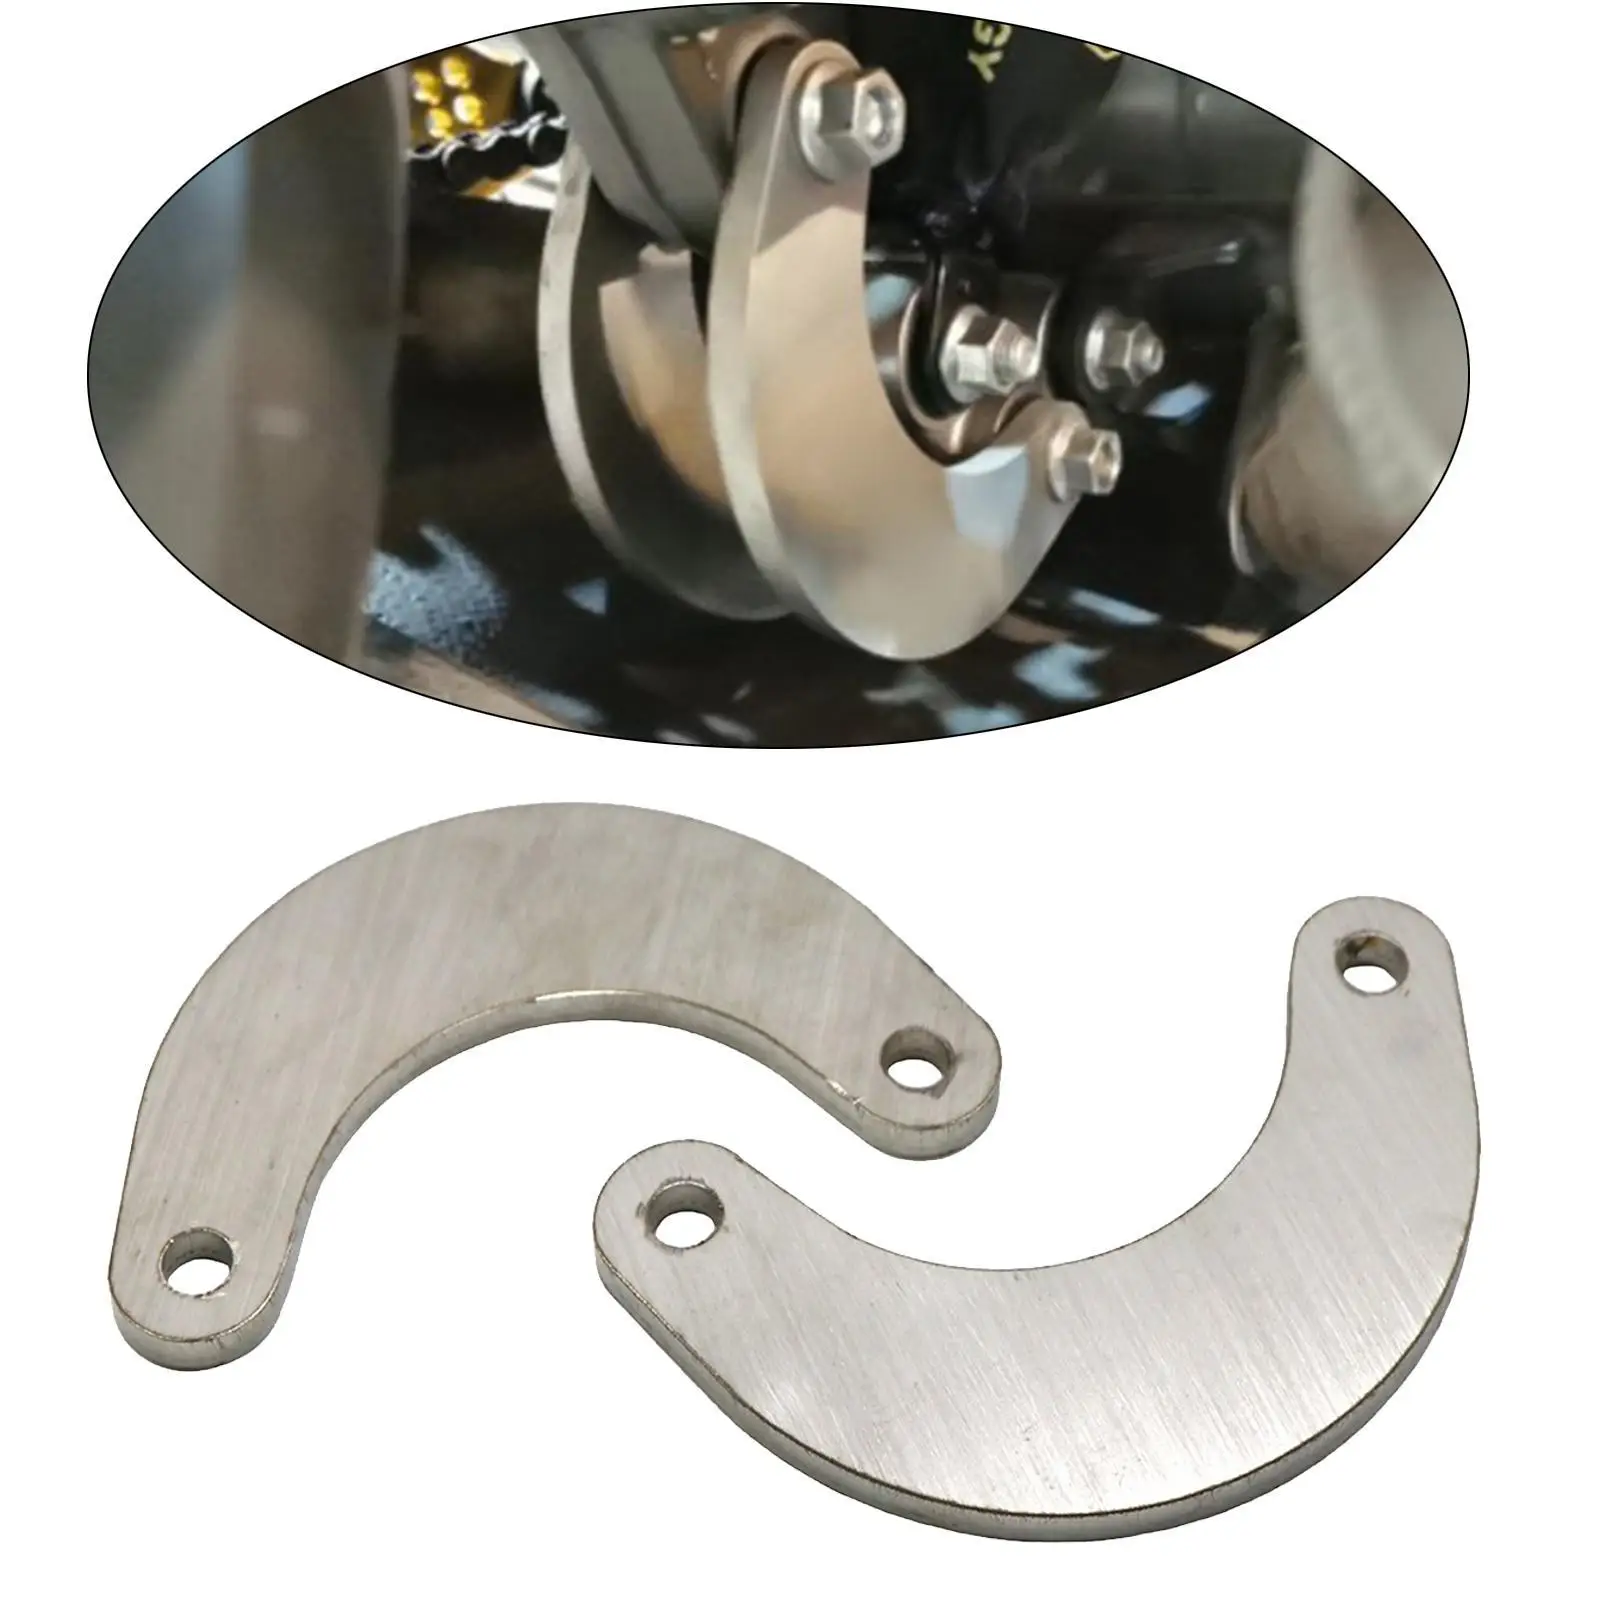 Stainless Steel Lowering Links  Lower the Body and Lower the AdjustmentFits for MT-15  2015 Replace Modification Parts